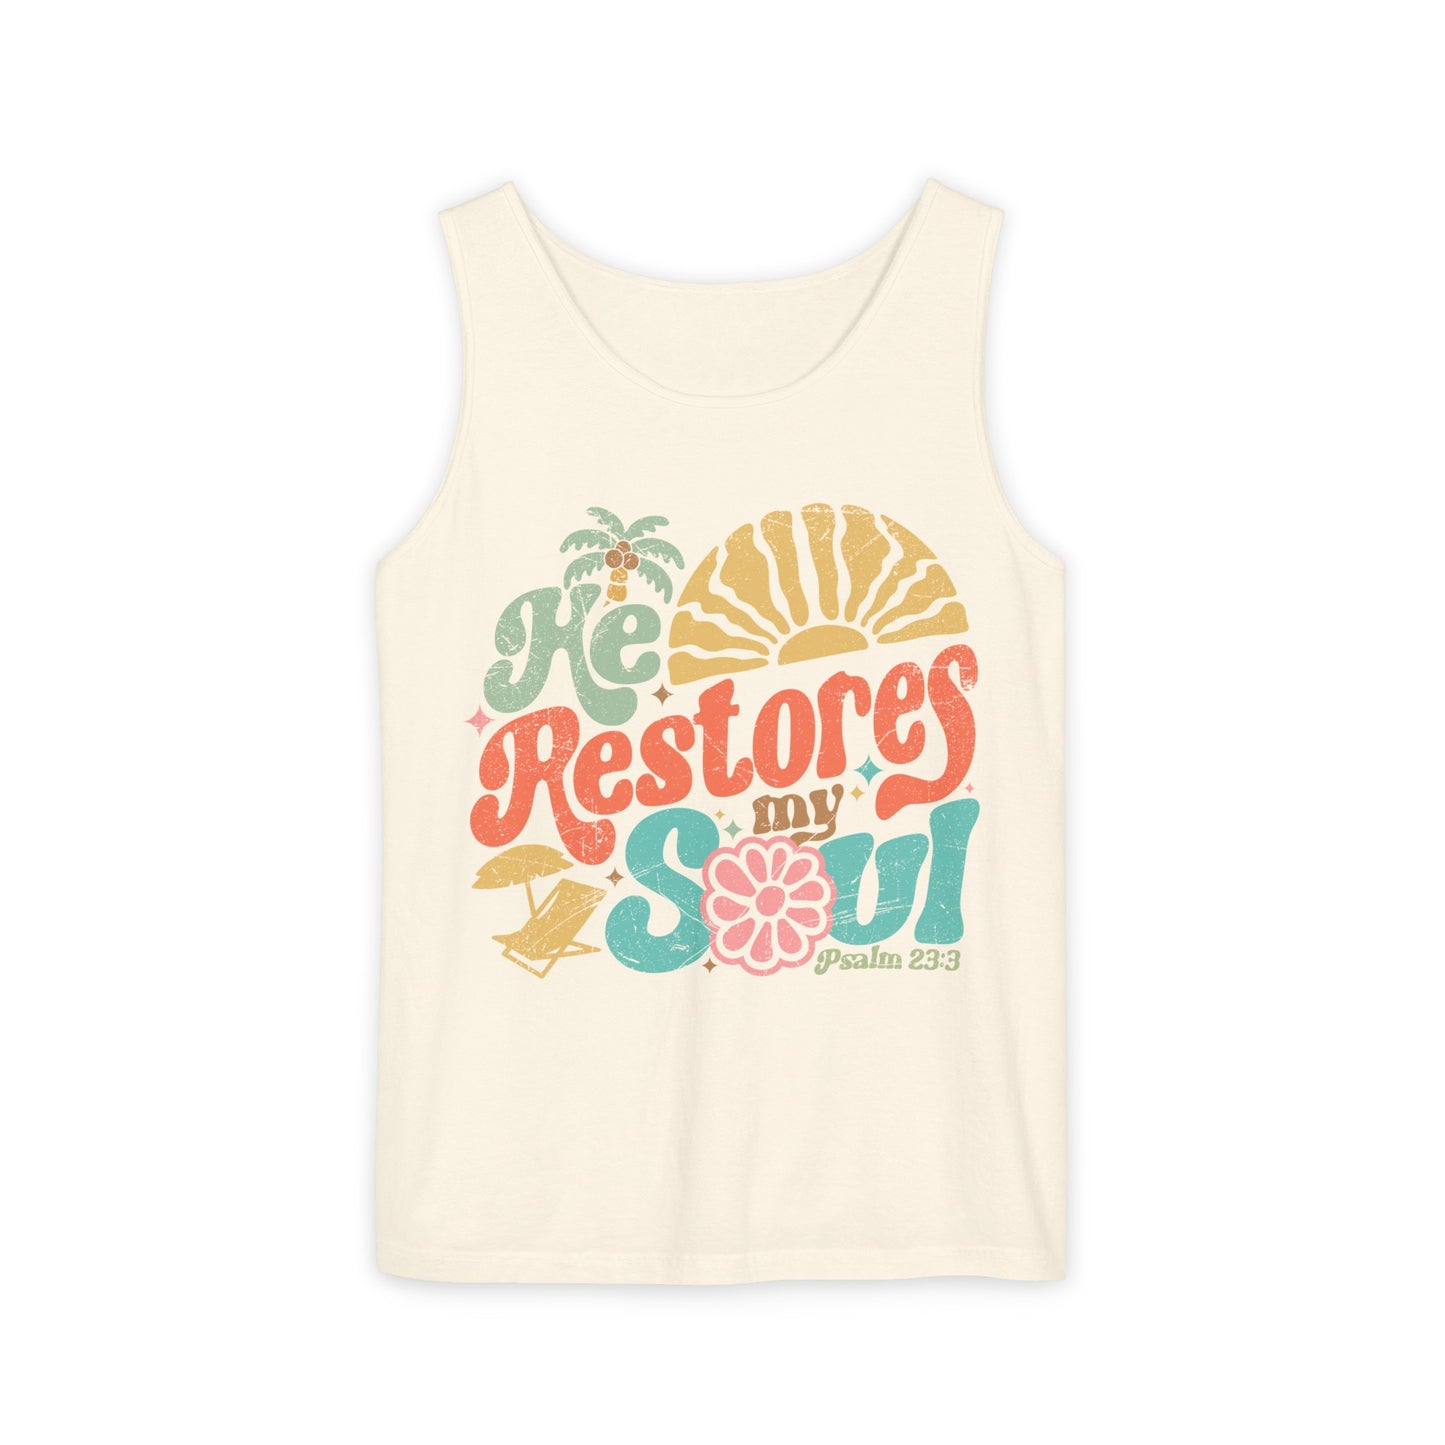 He Restores My Should Unisex Garment-Dyed Tank Top